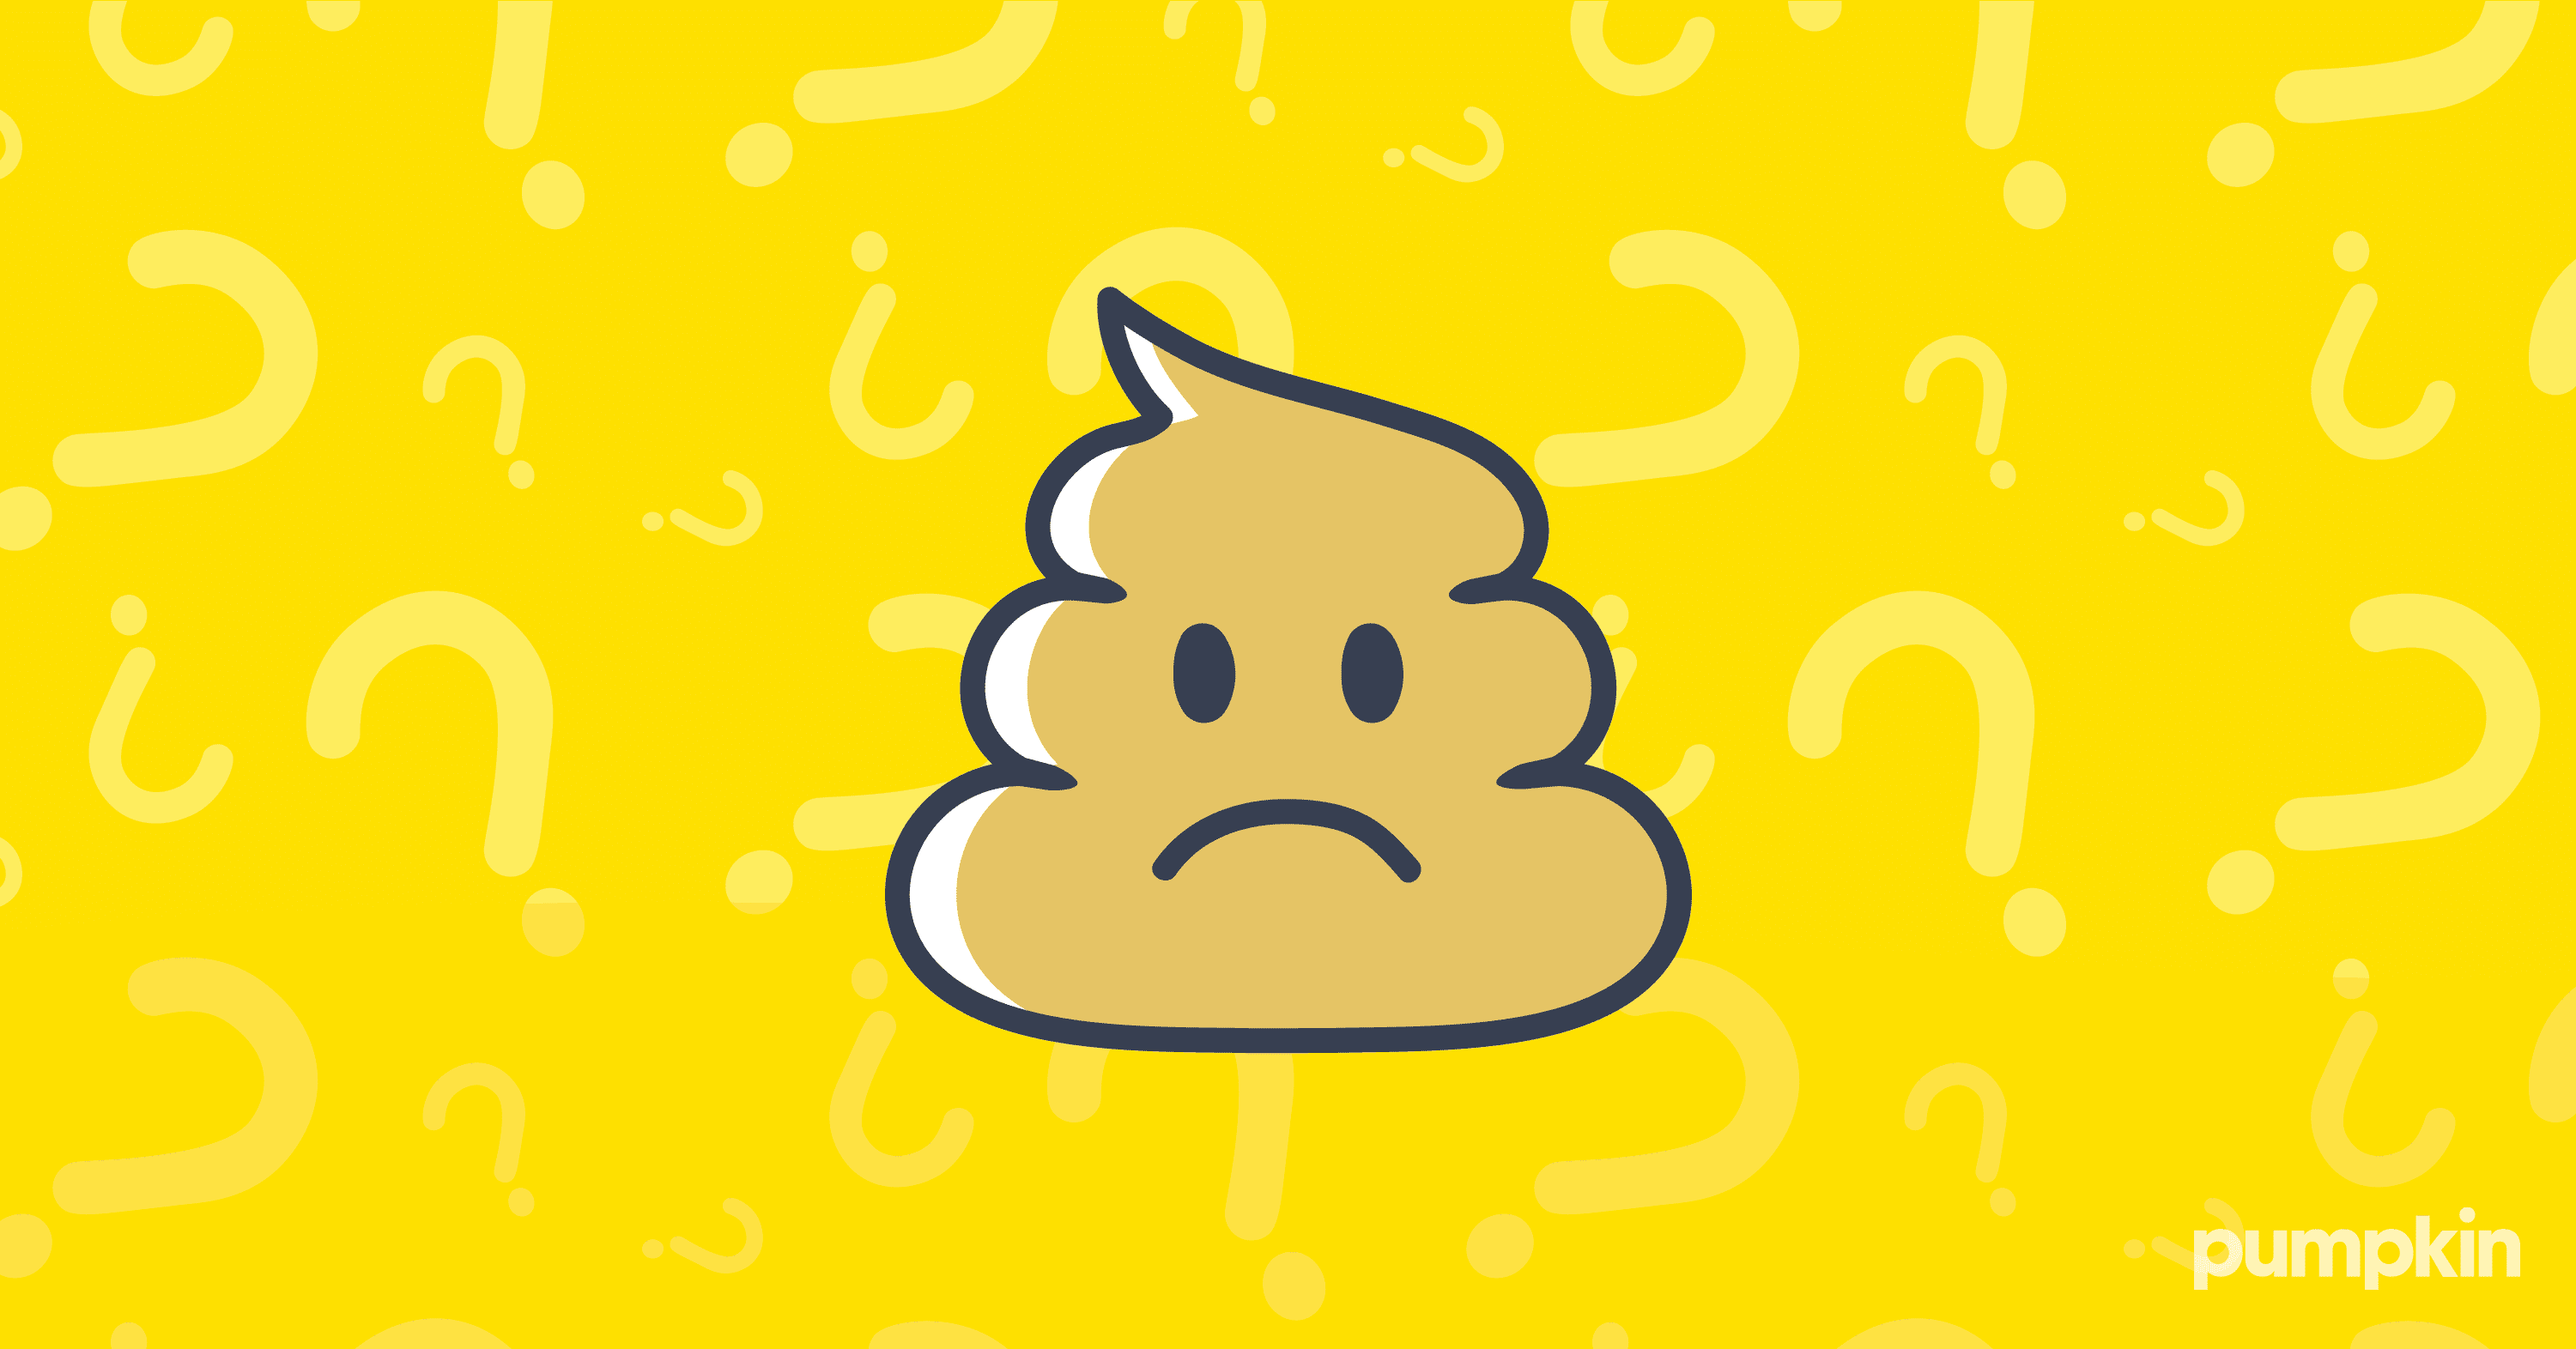 yellow poop in adults